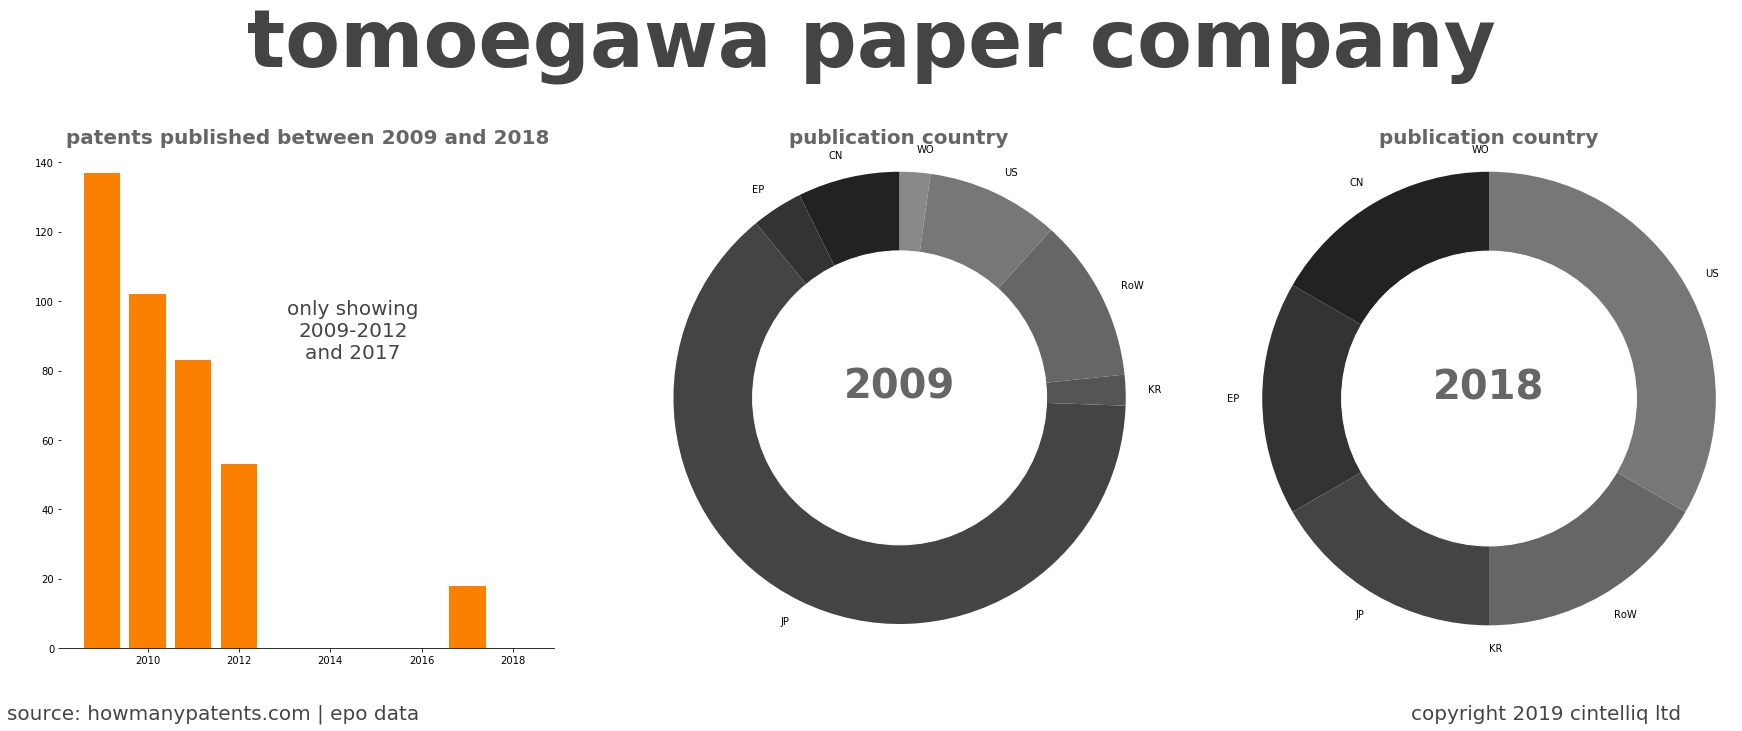 summary of patents for Tomoegawa Paper Company